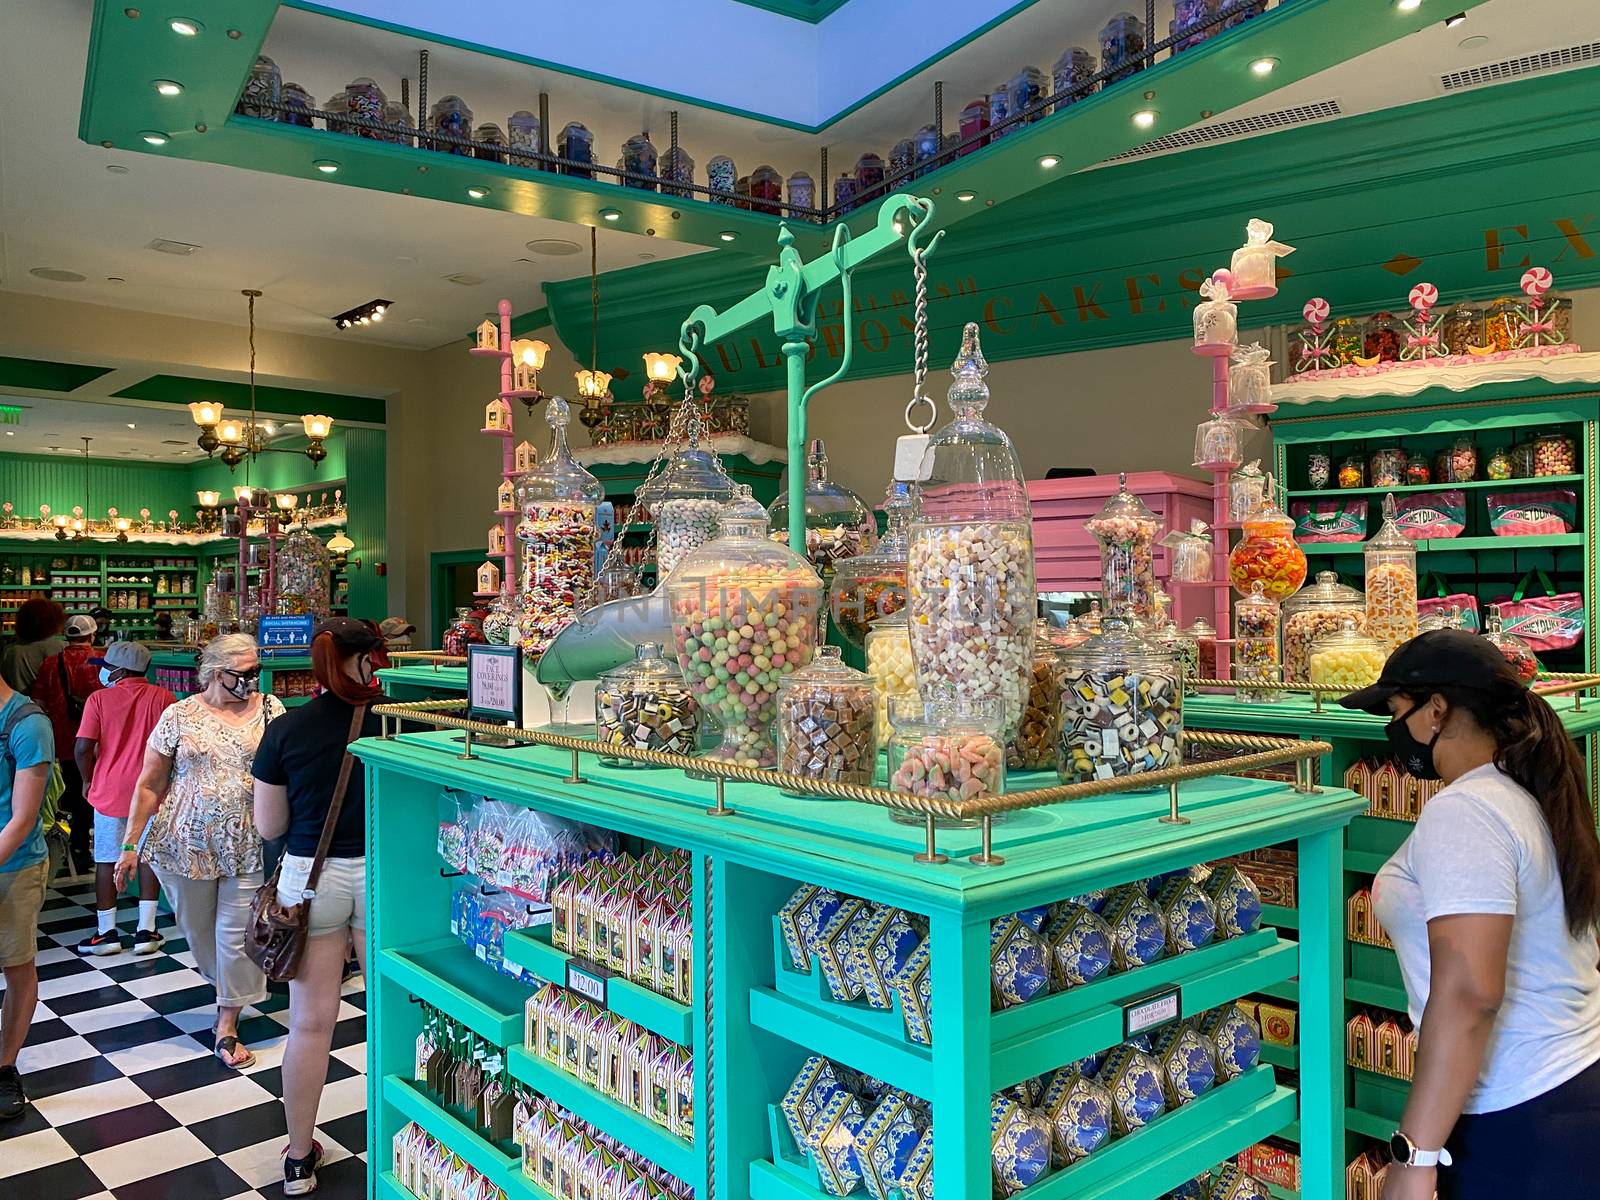 The interior of Honeydukes Sweet Shop themed rom the Harry Potte by Jshanebutt